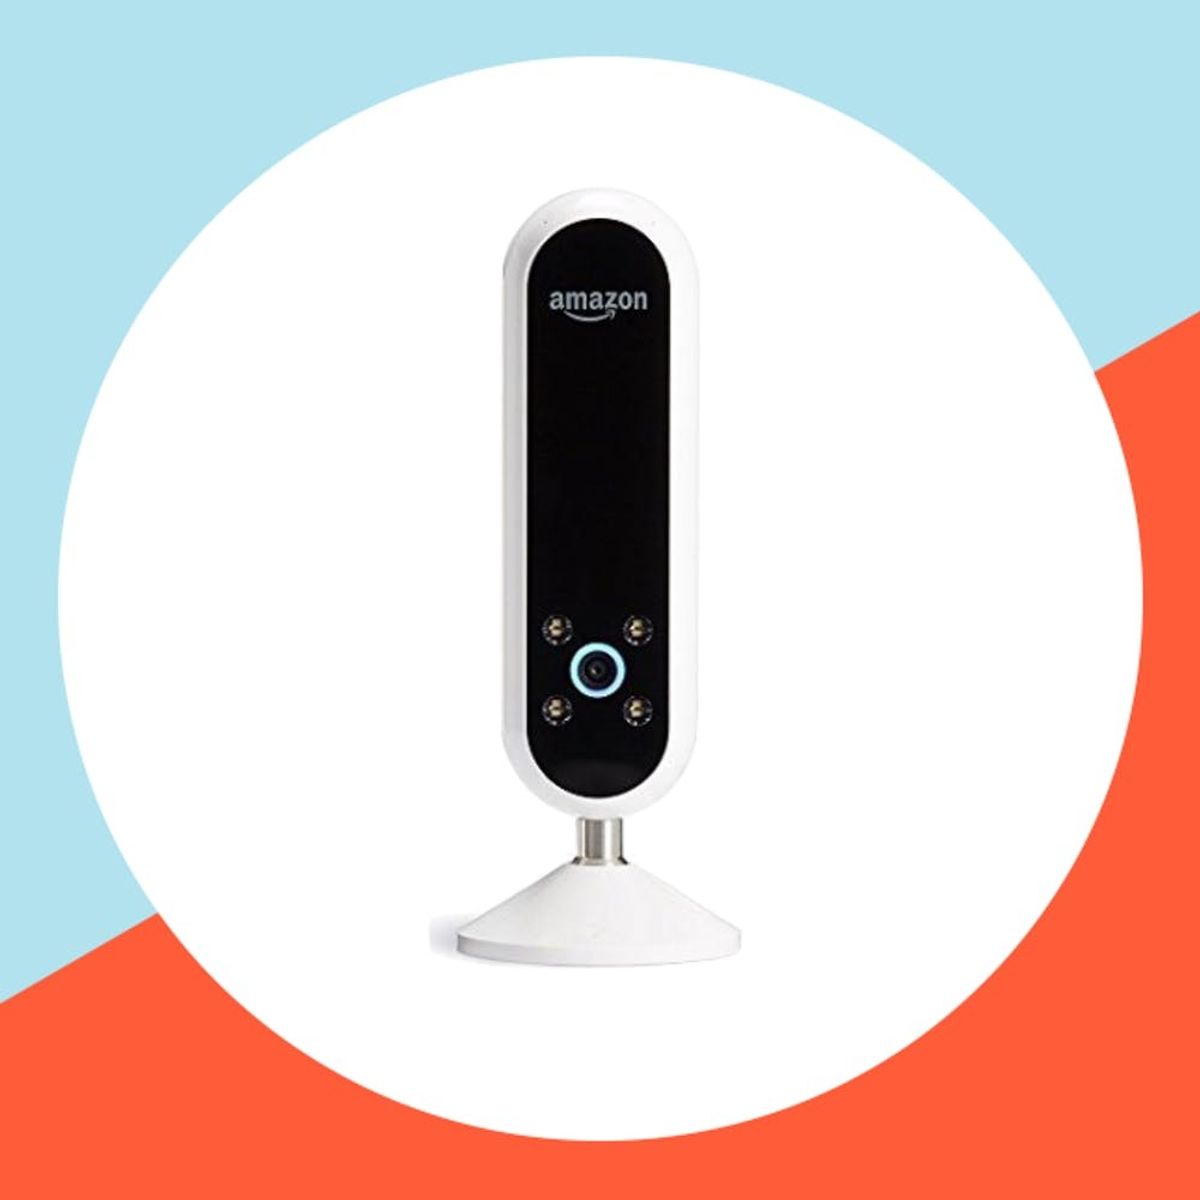 Amazon Just Released a Personal Stylist That Lives in Your Alexa